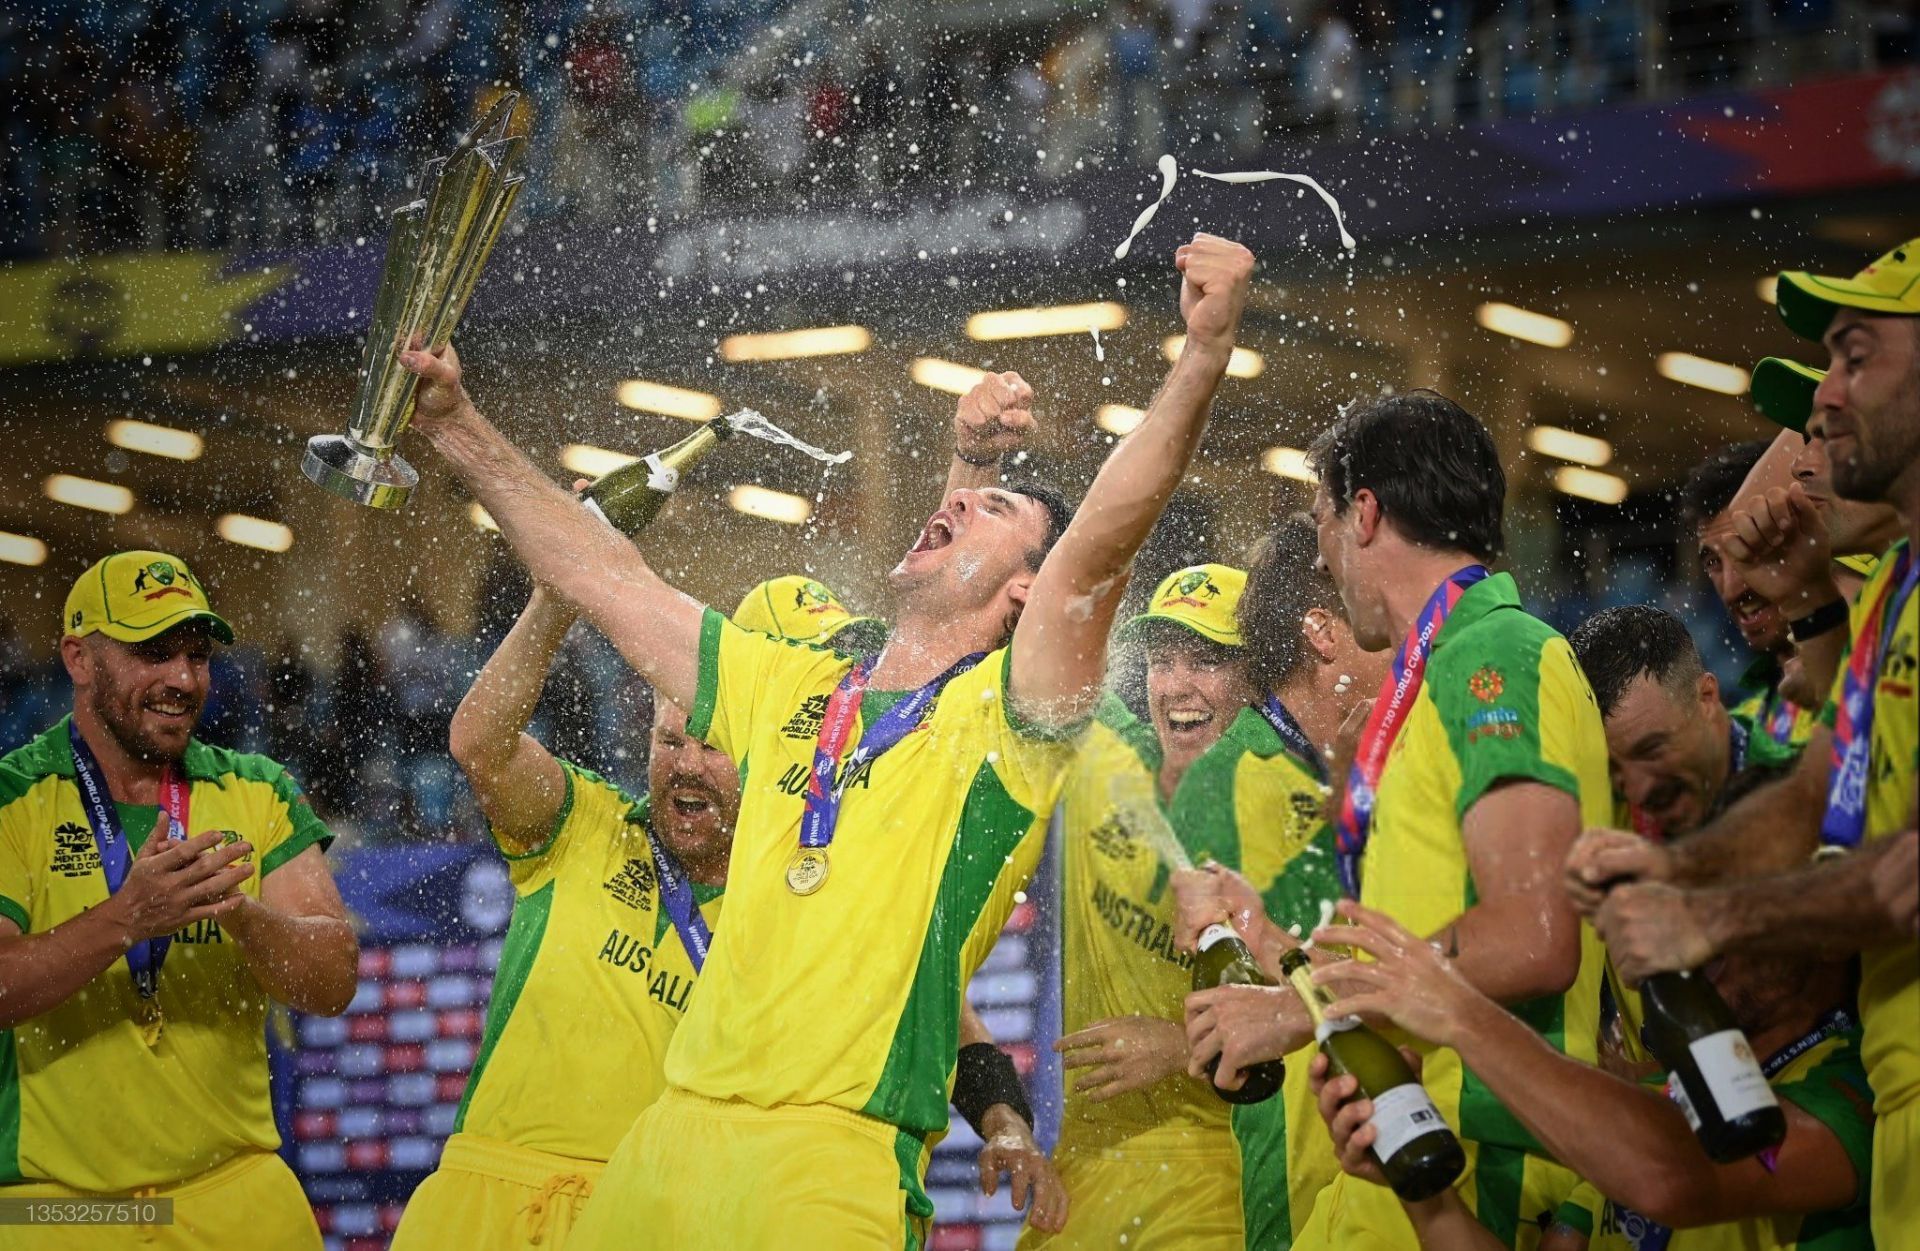 A historic picture for Australian cricket